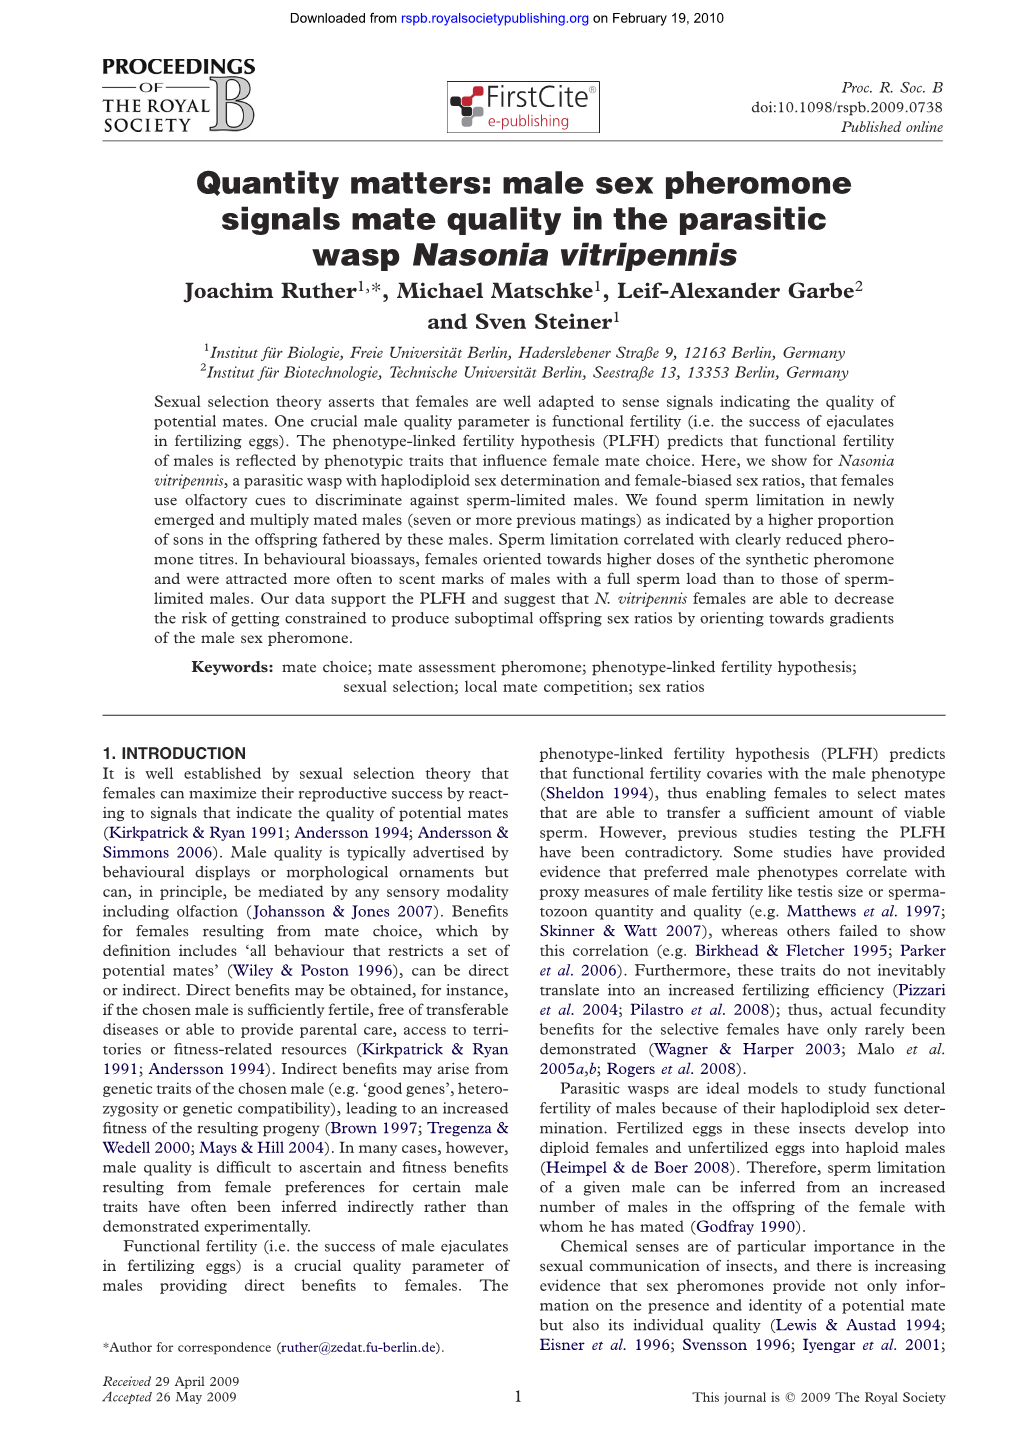 Quantity Matters: Male Sex Pheromone Signals Mate Quality in the Parasitic Wasp Nasonia Vitripennis